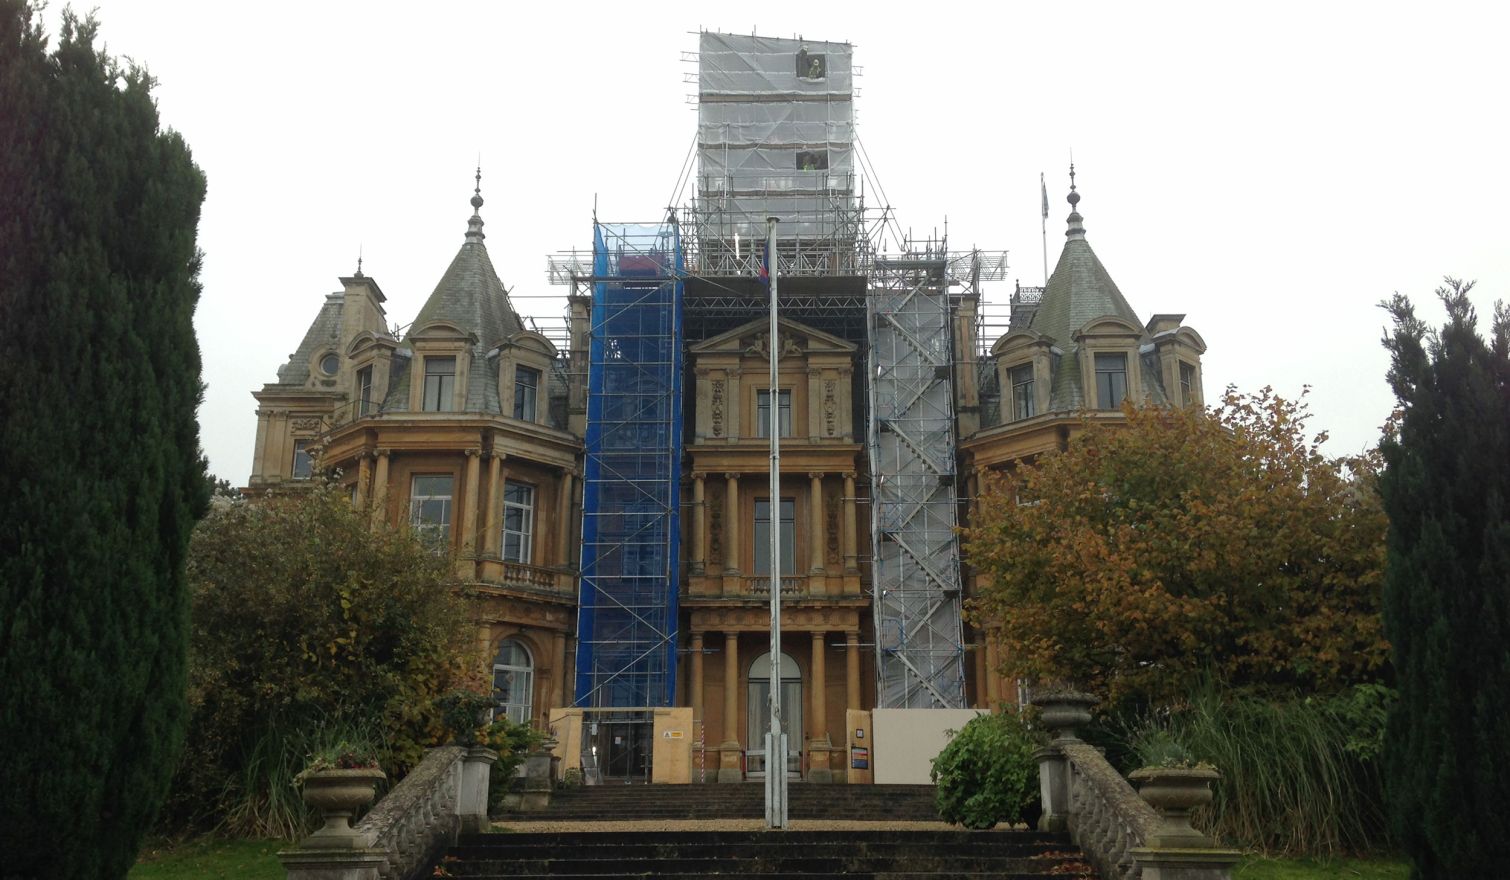 RAF Halton House - Bridged Access Scaffold for the Removal of The Belvedere (Turret)